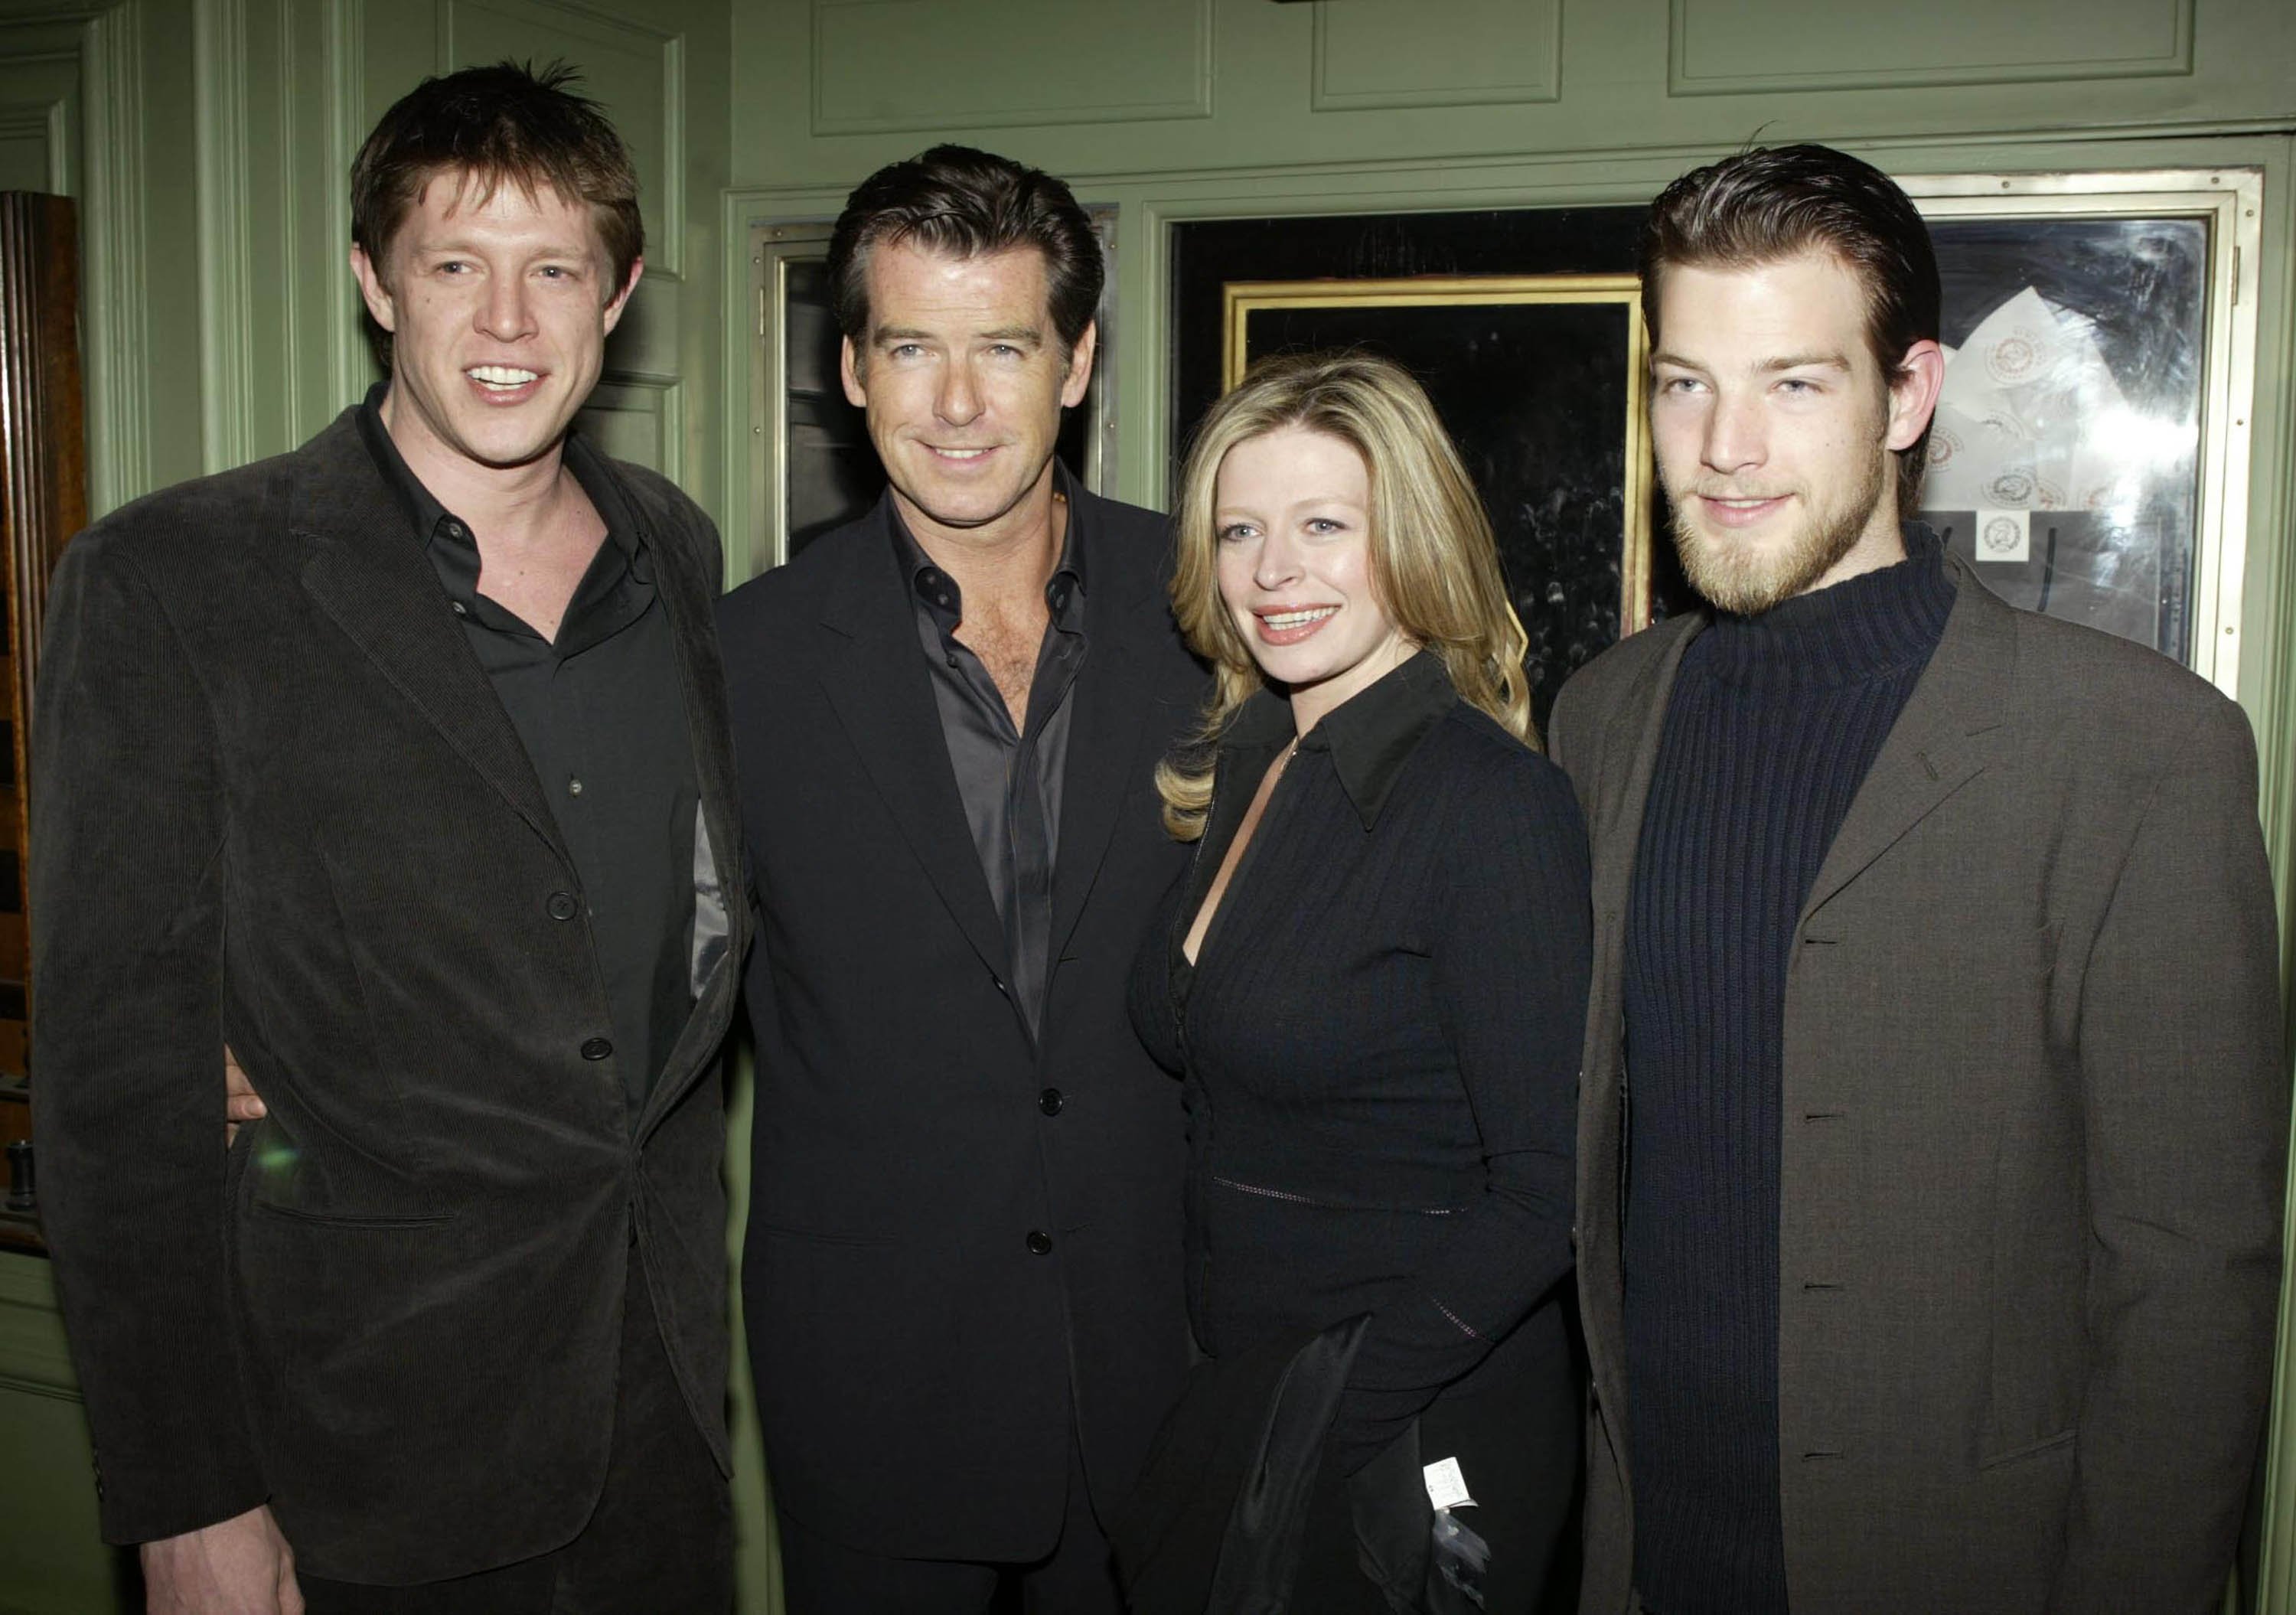 Pierce Brosnan with his children Shaun, Charlotte and Chris attend the party for the premiere of the film "Evelyn" at Simpsons restaurant on March 17, 2003  | Source: Getty Images